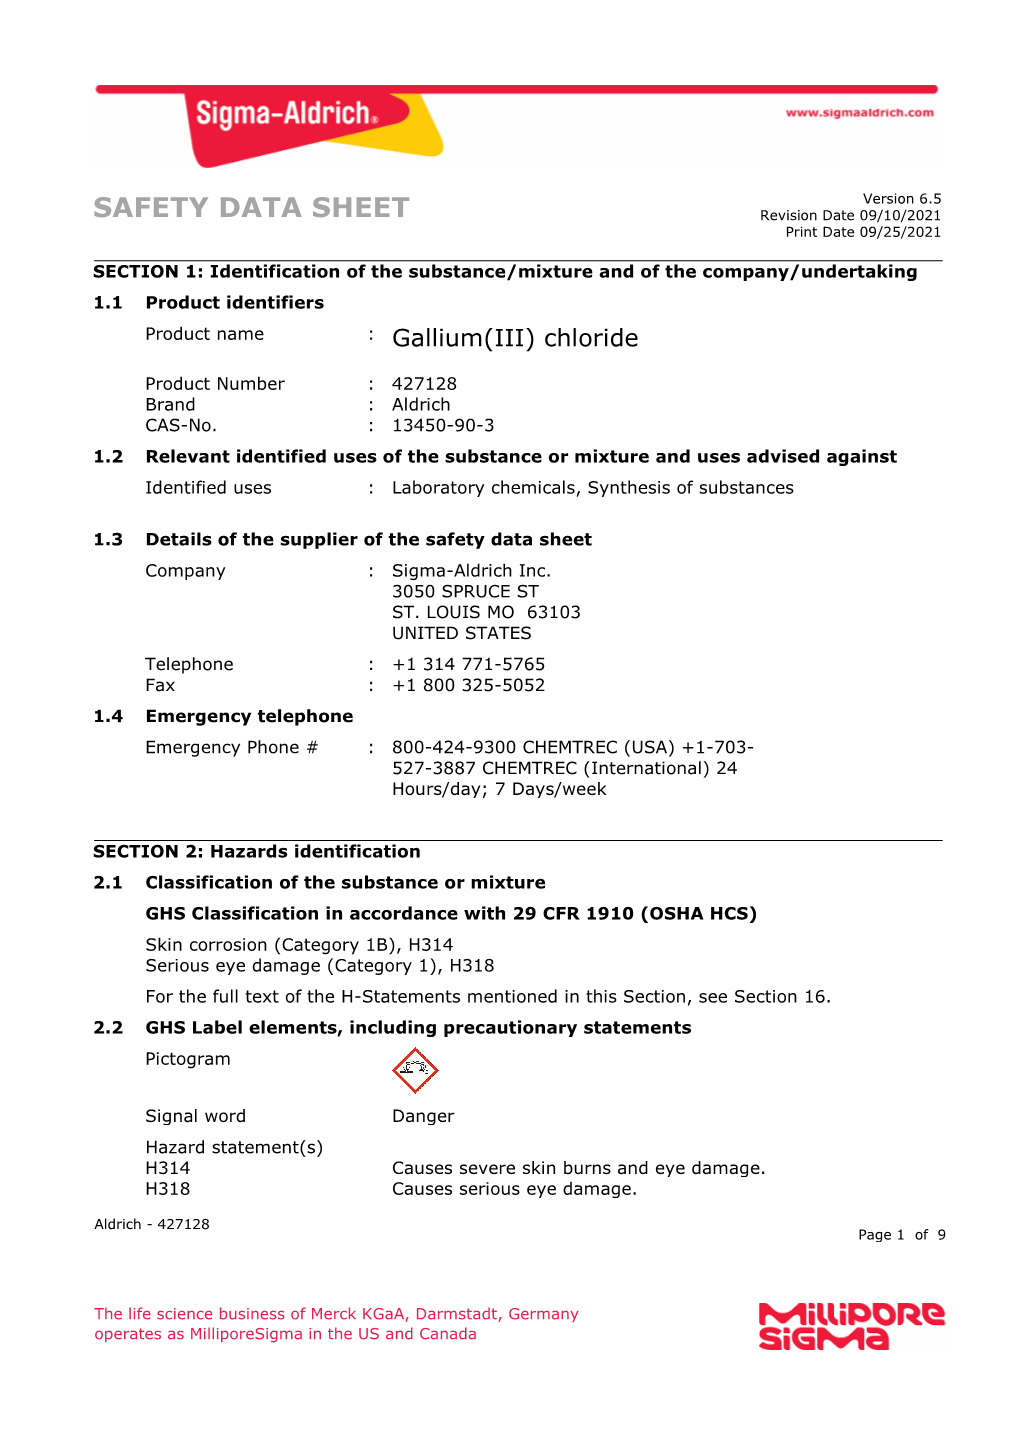 SAFETY DATA SHEET Revision Date 09/10/2021 Print Date 09/25/2021